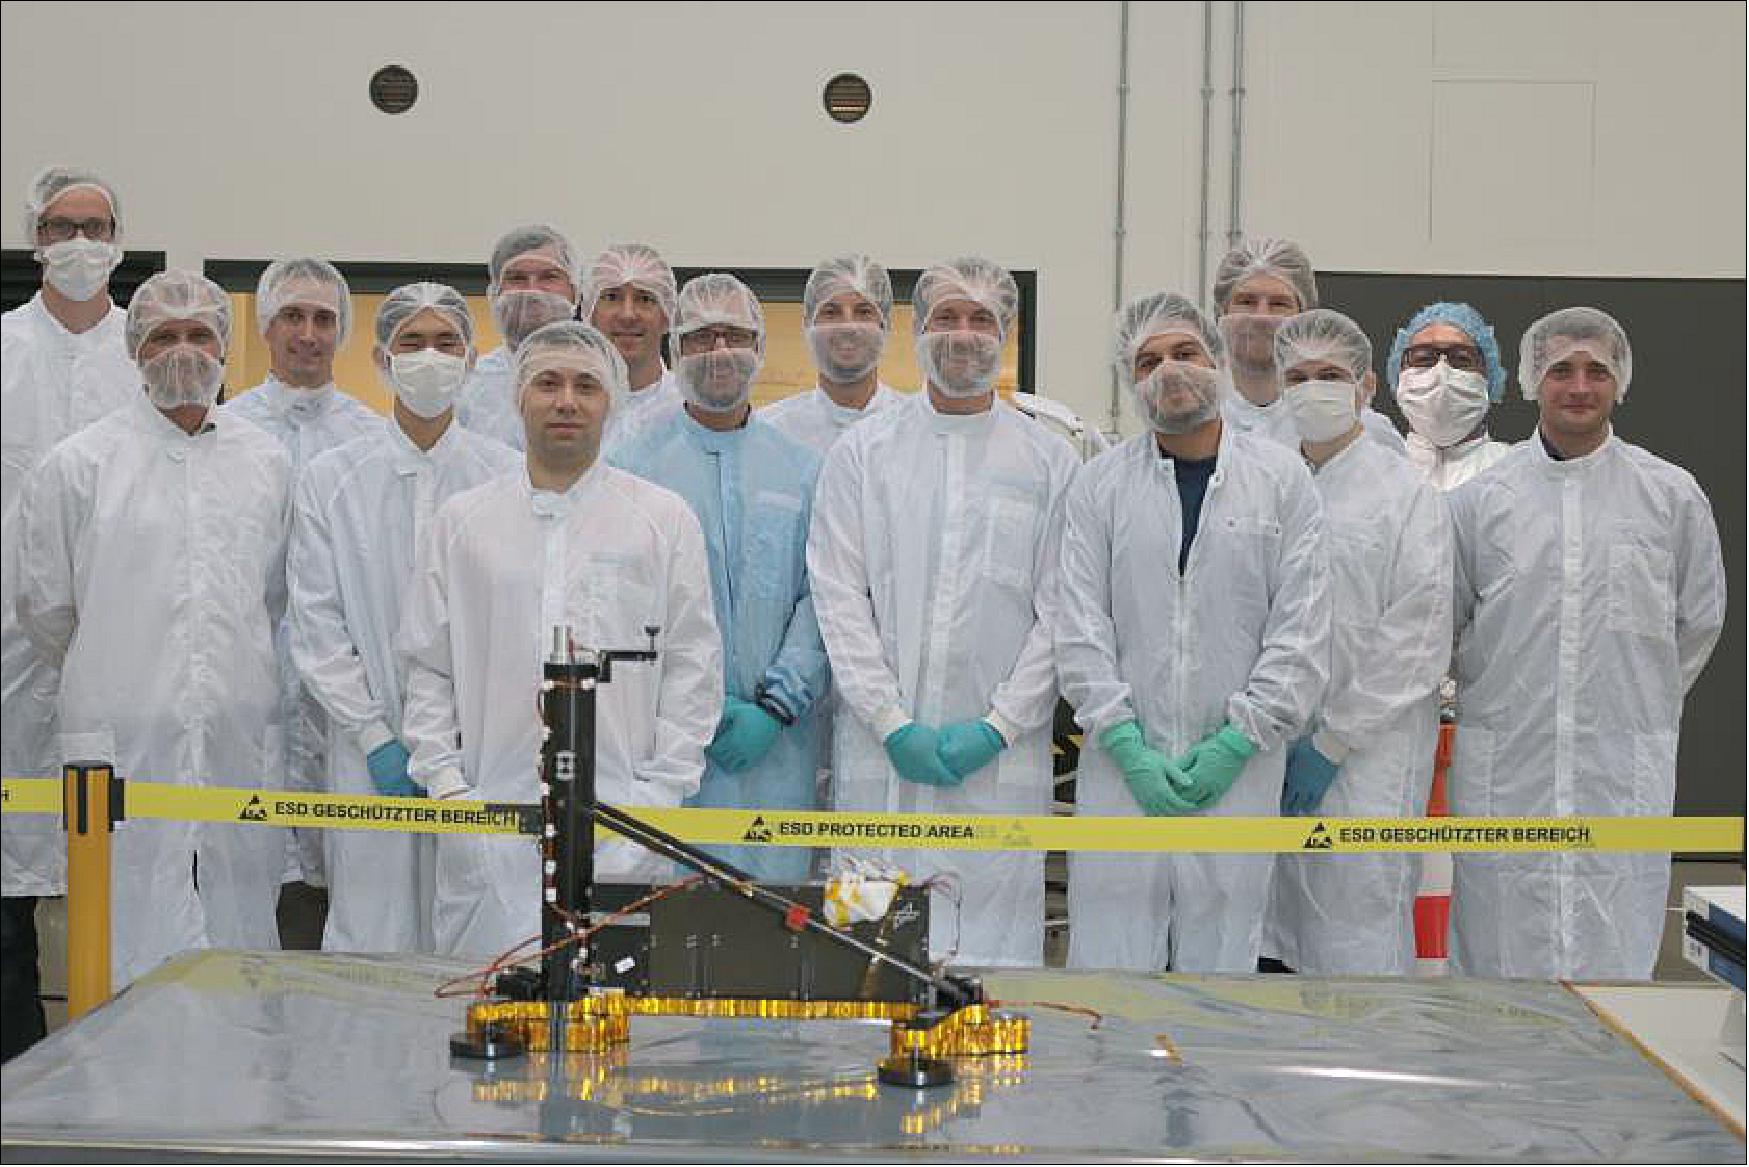 Figure 69: Photo of the development team and the HP3 flight unit which is ready for delivery after extensive tests and reviews (image credit: DLR)